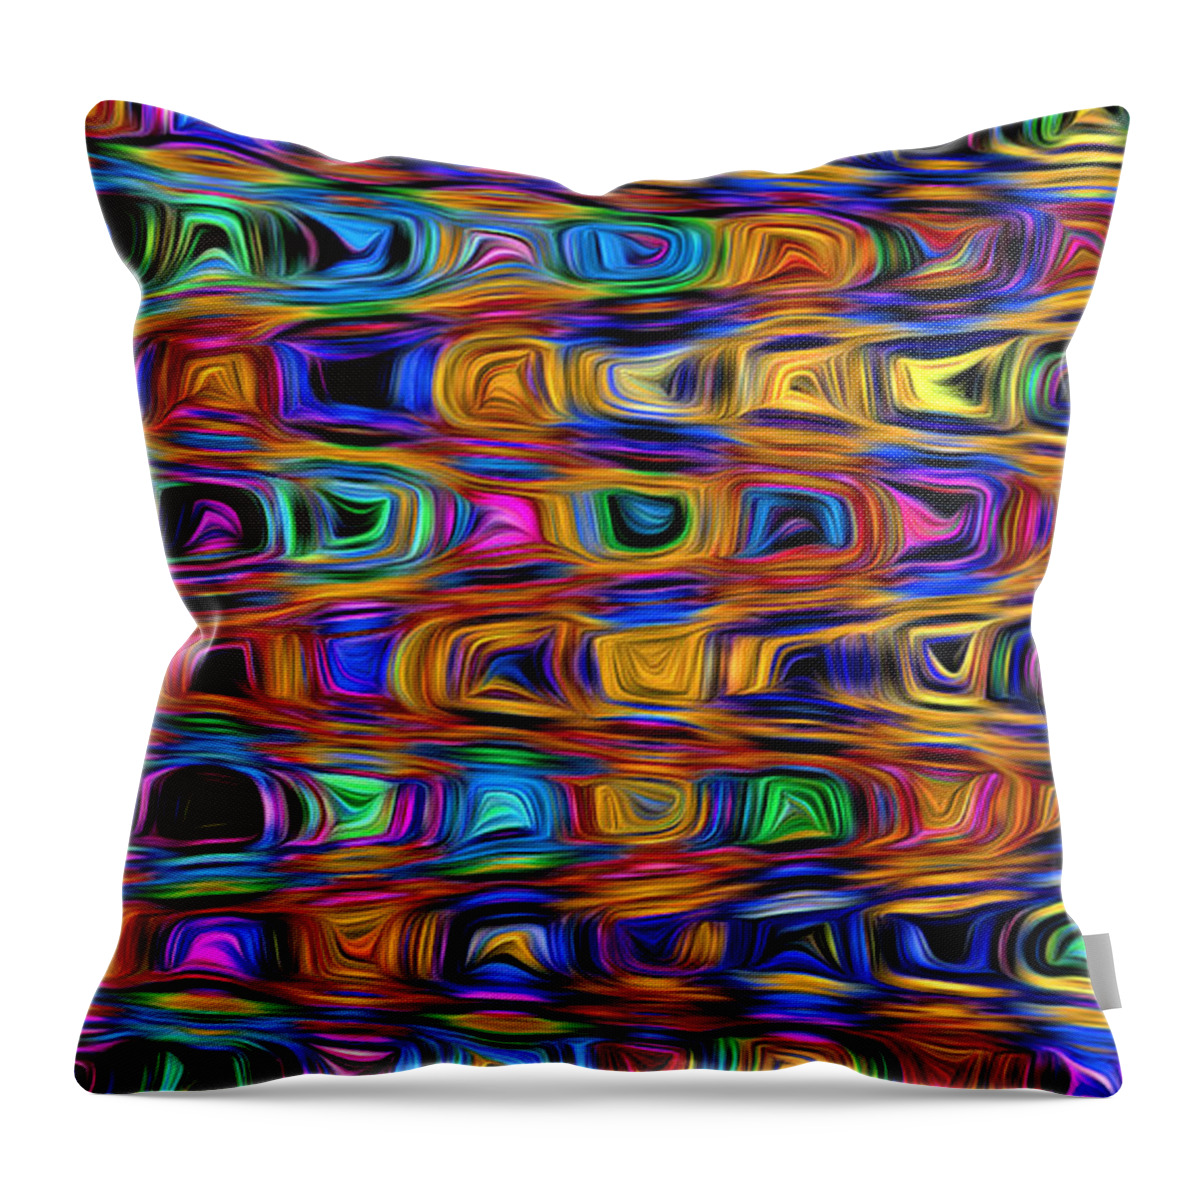 Abstract Throw Pillow featuring the digital art Mod Psychedelic Pattern - Abstract by Ronald Mills